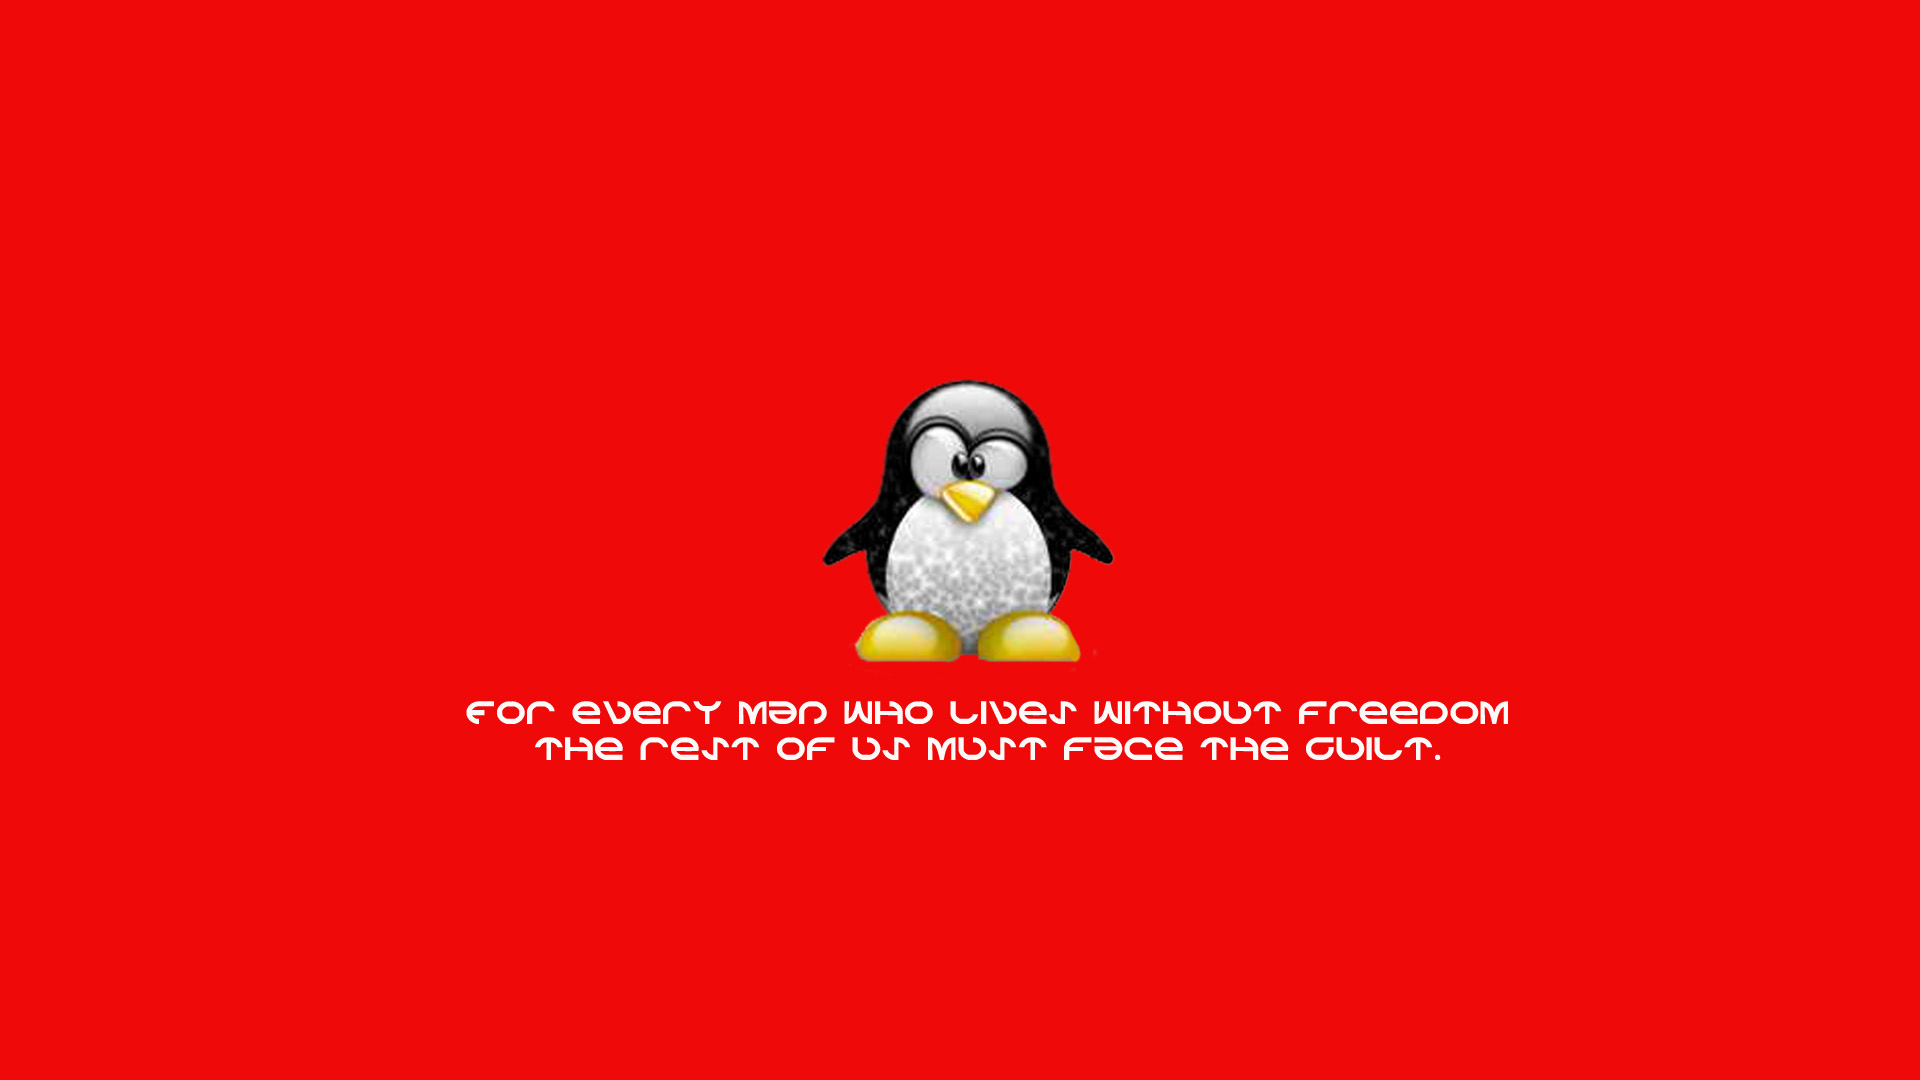 Linux HD Pictures Wallpapers HD Tux Desktop8032 Linux HD Wallpapers